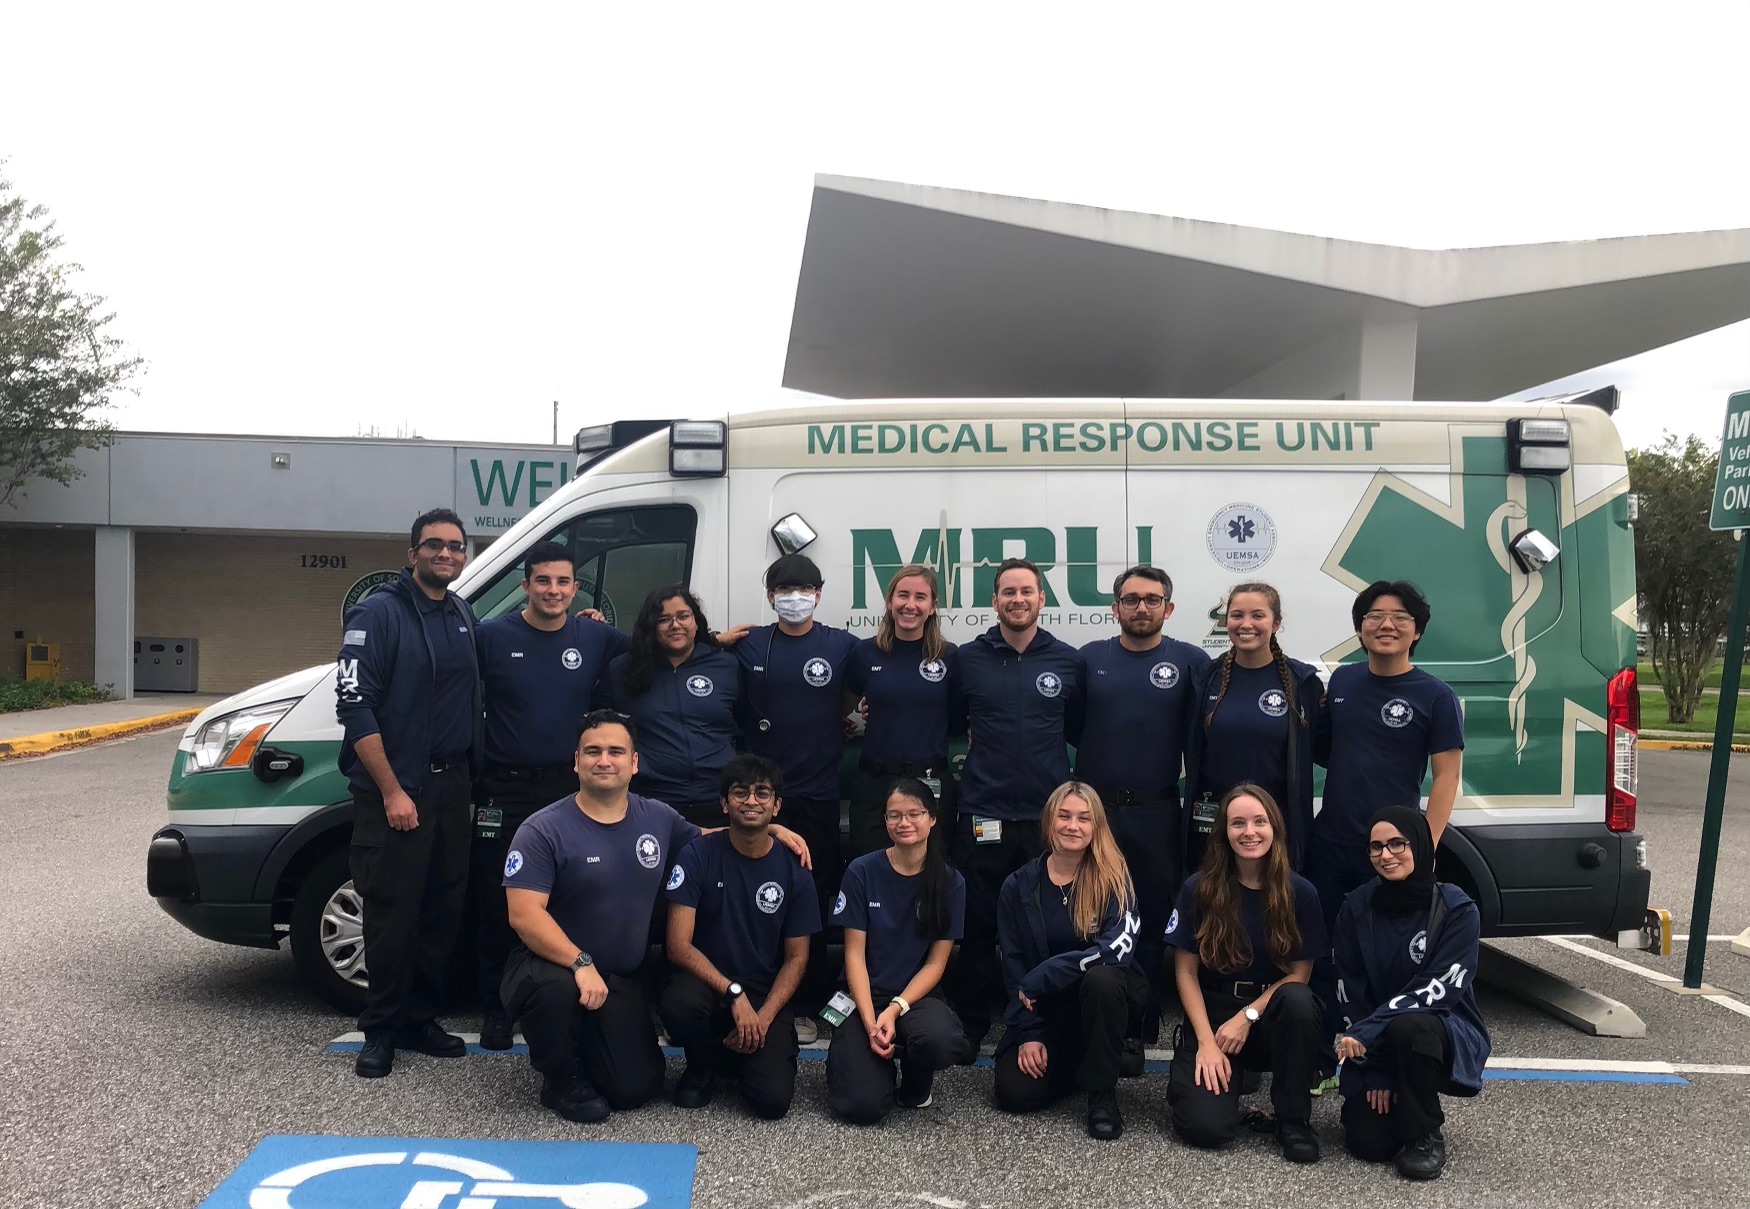 Student EMT's care for special needs shelter patients amid Hurricane Ian